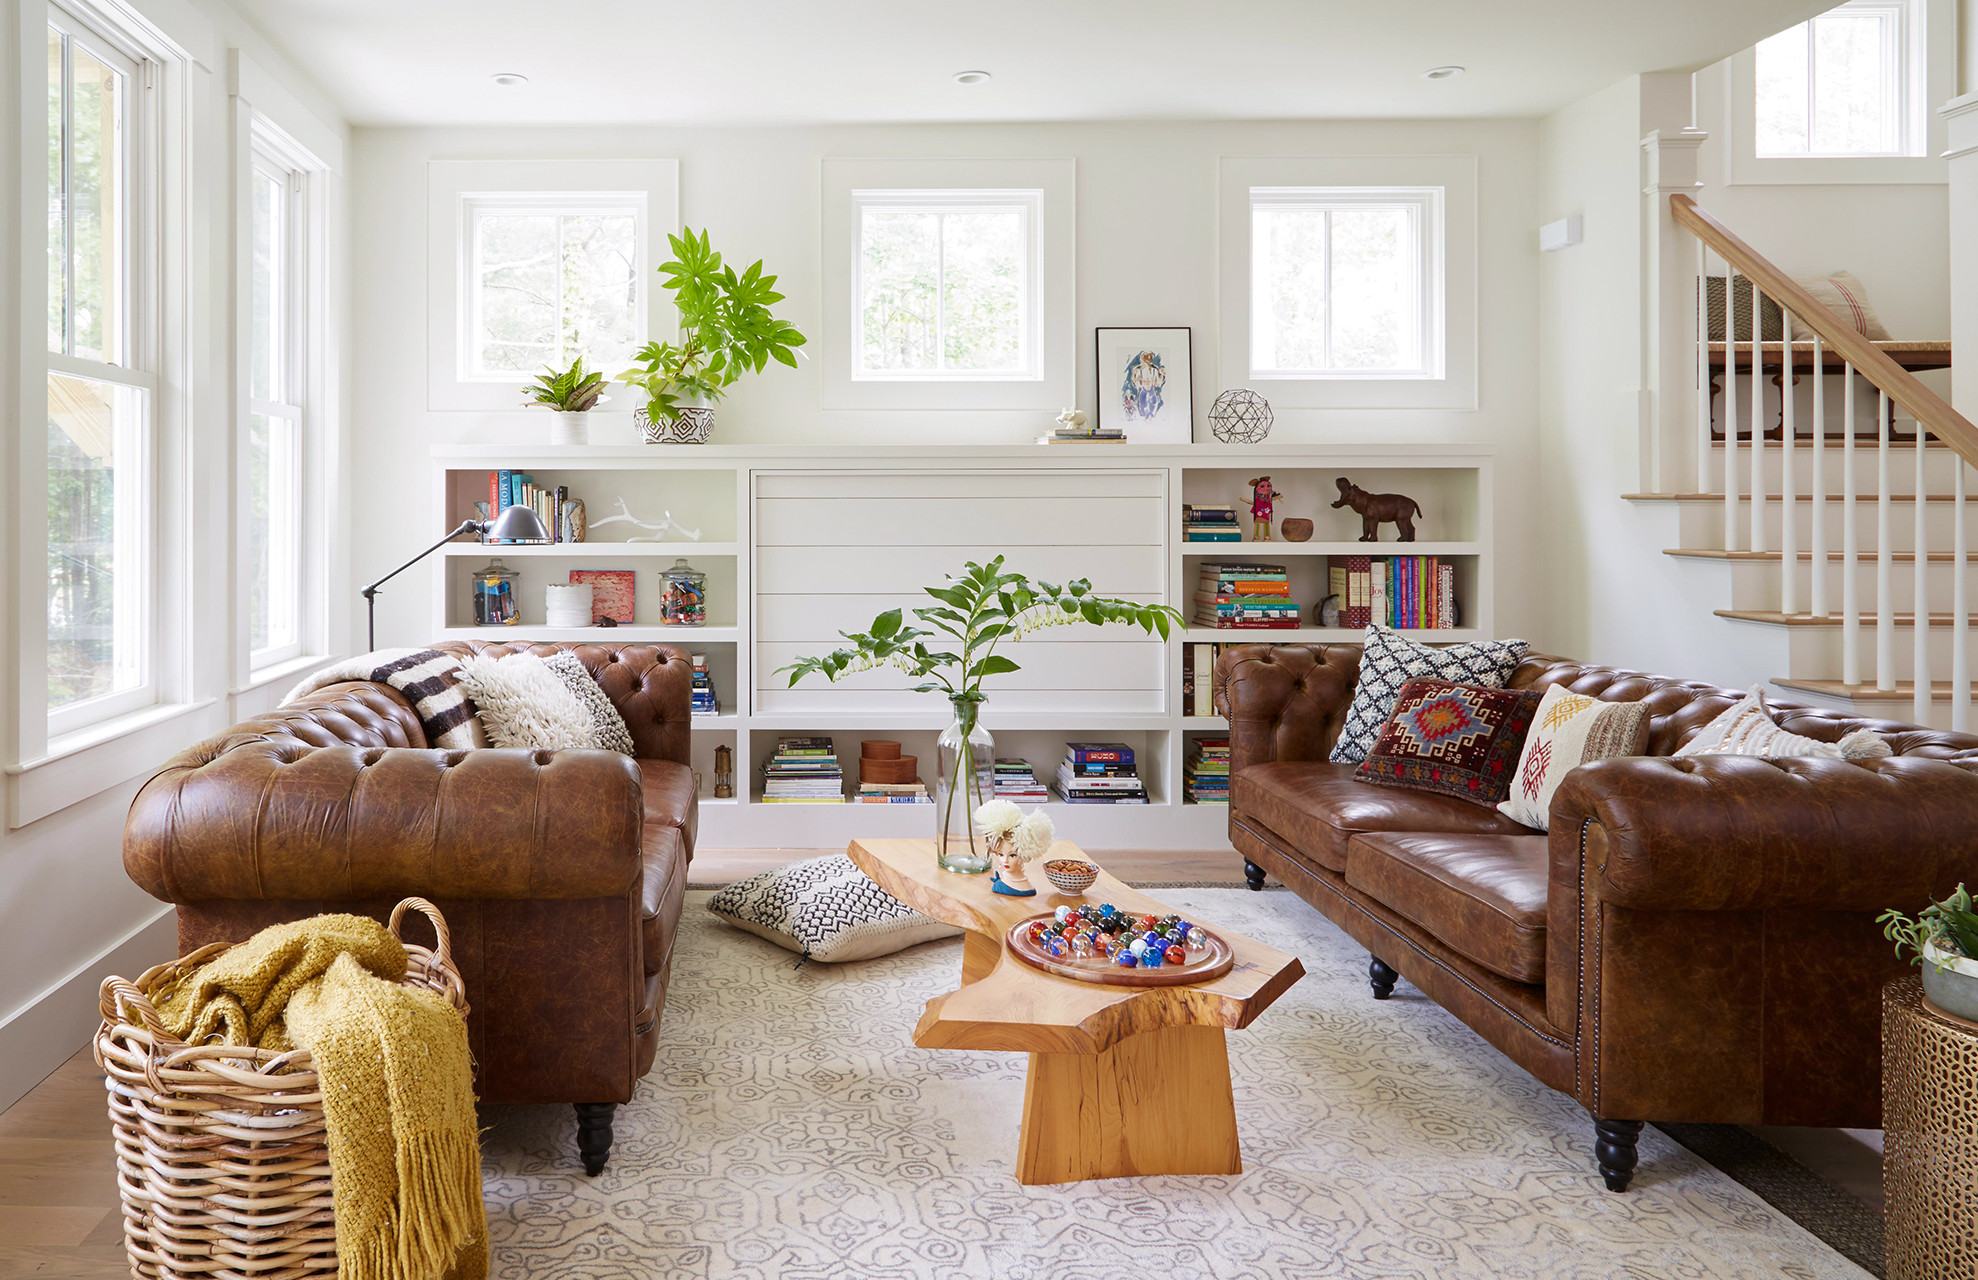 Brown Couches Living Room Ideas
 Living Room Decorating and Design